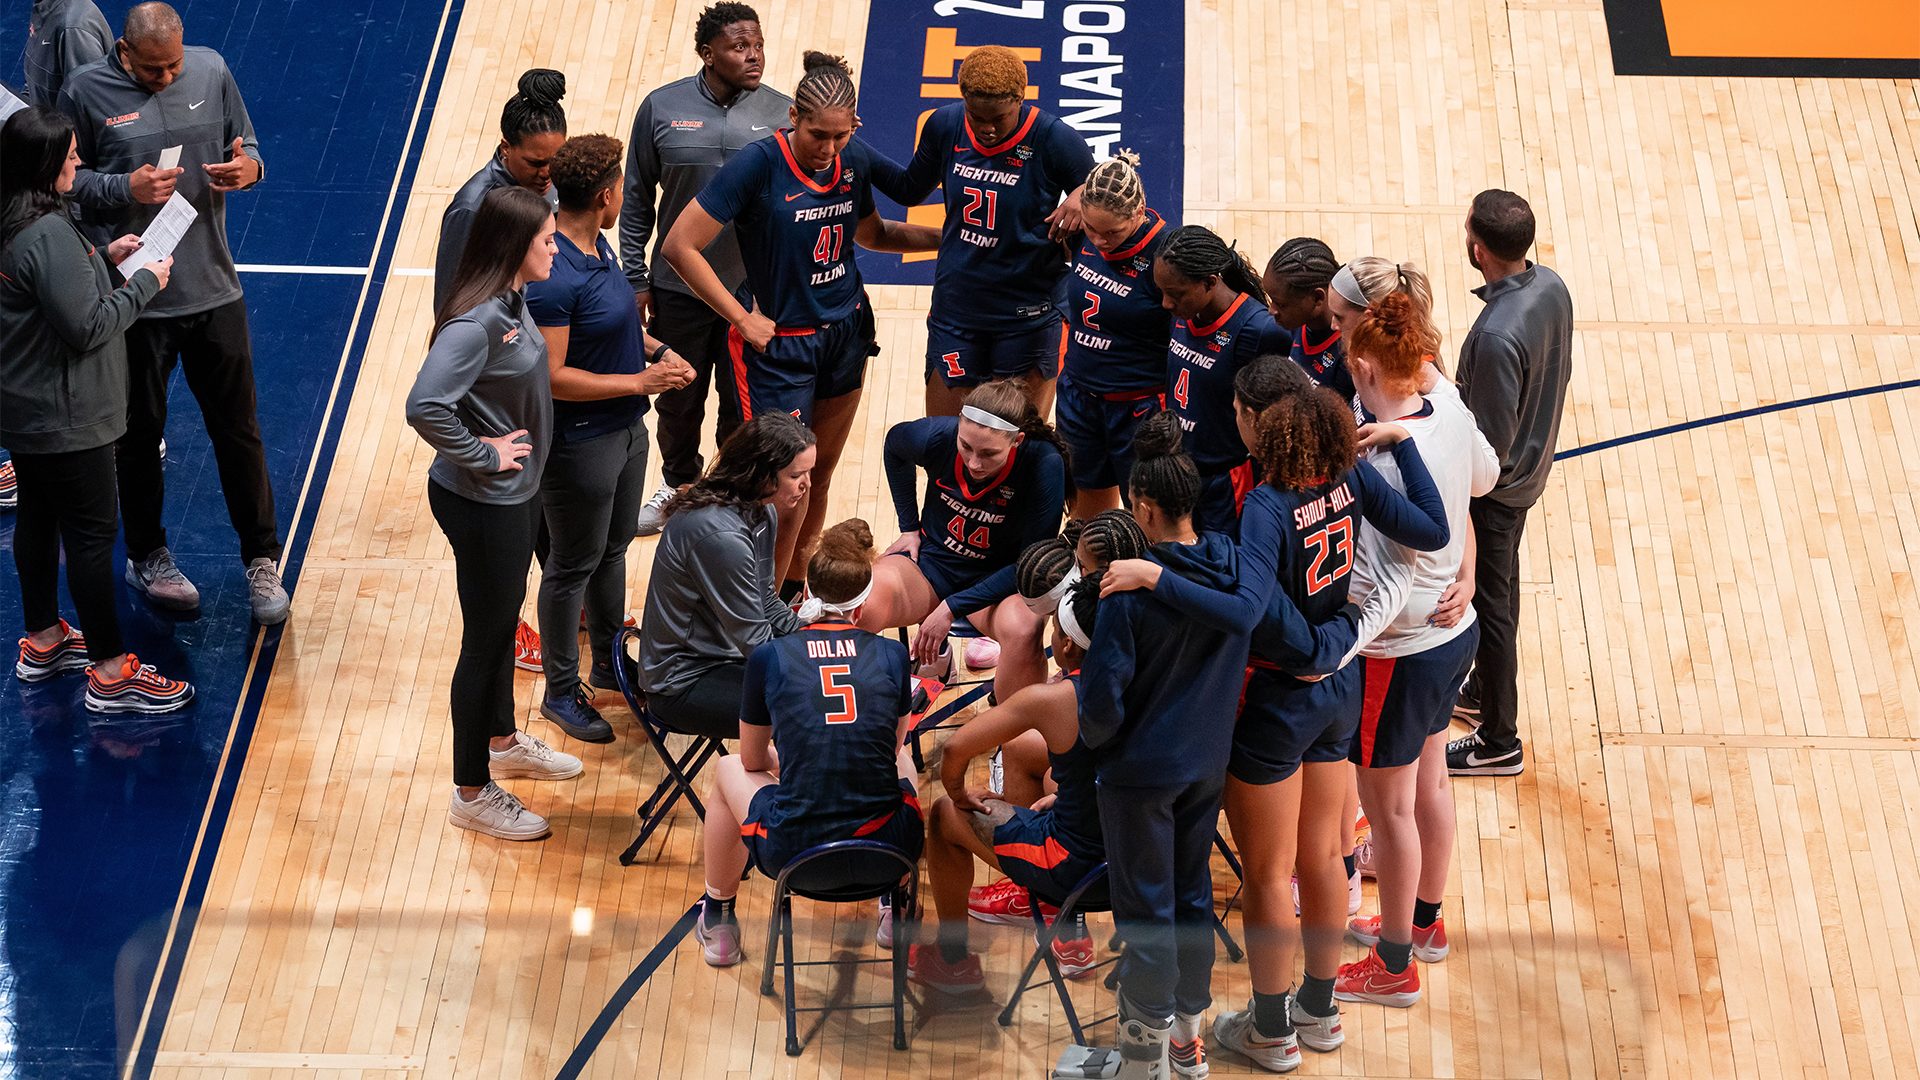 Players wearing dark blue jersey's with orange writing gather around their couch who is sitting on the basketball court.